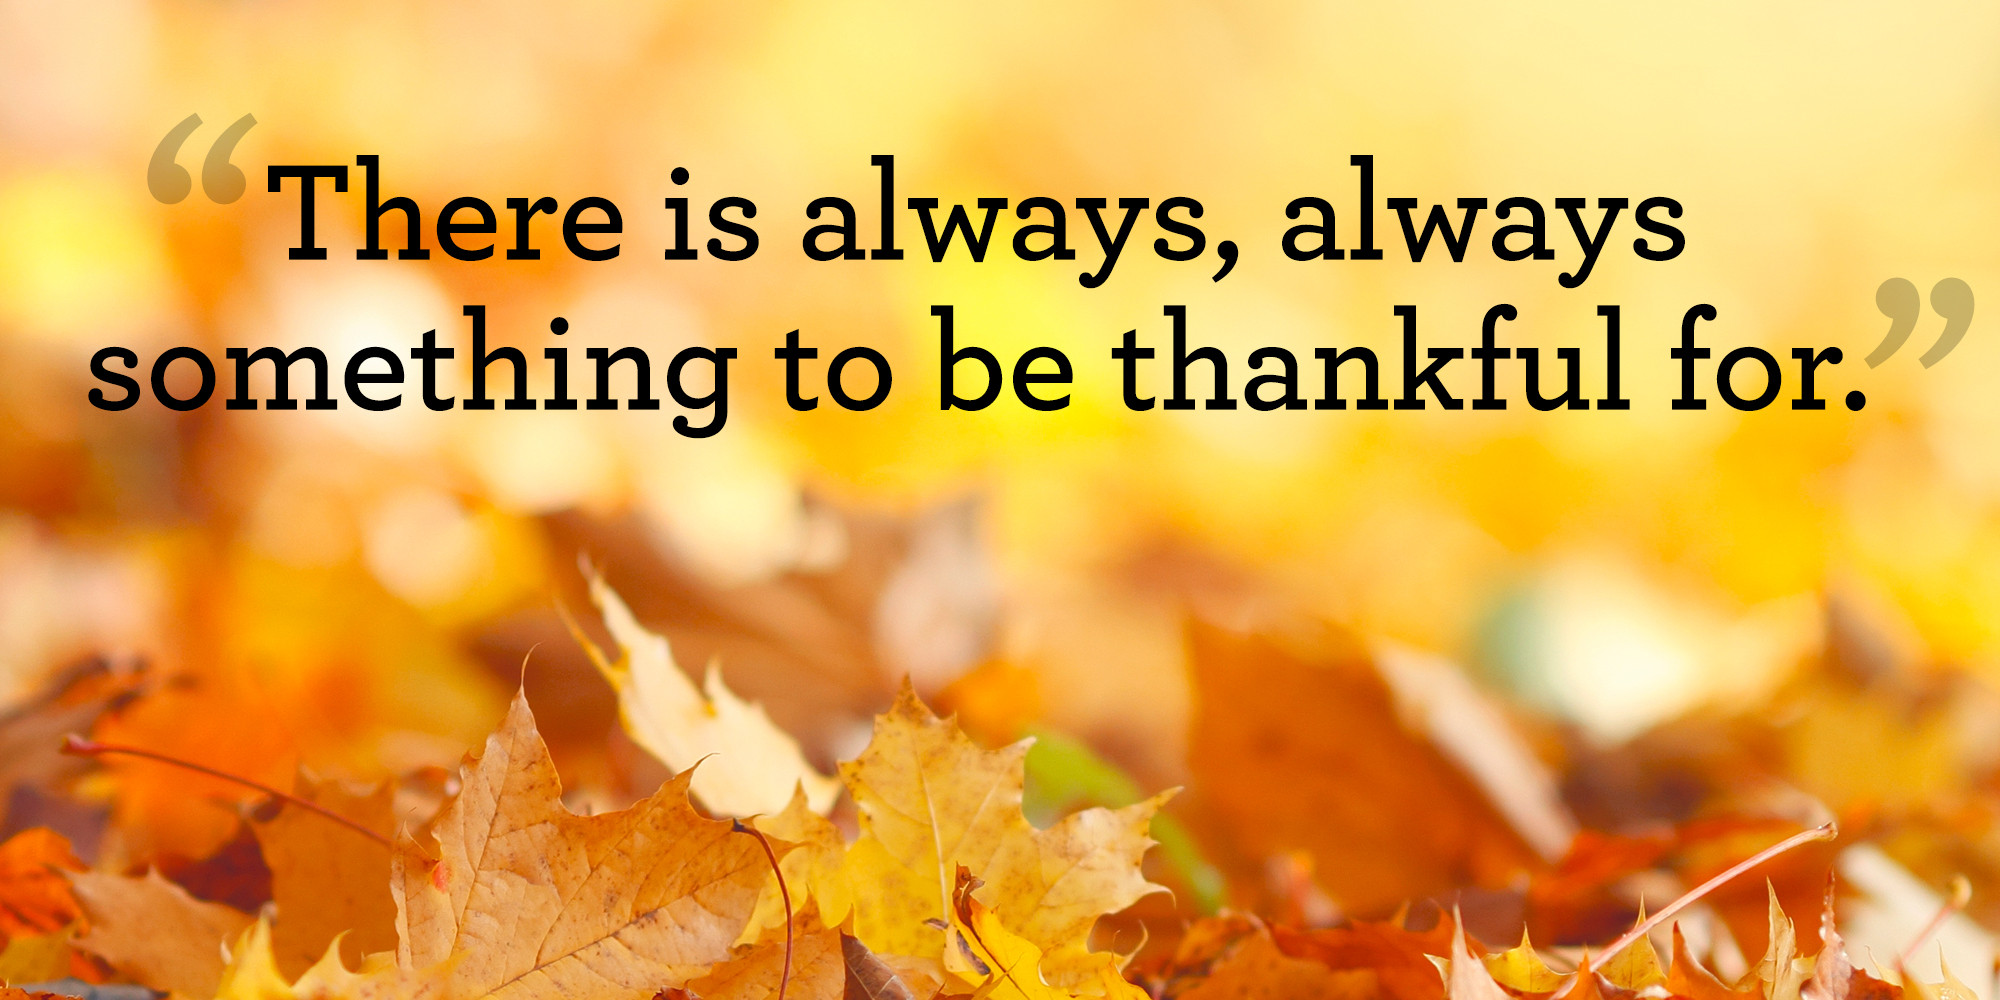 Quote For Thanksgiving
 10 Best Thanksgiving Quotes Meaningful Thanksgiving Sayings